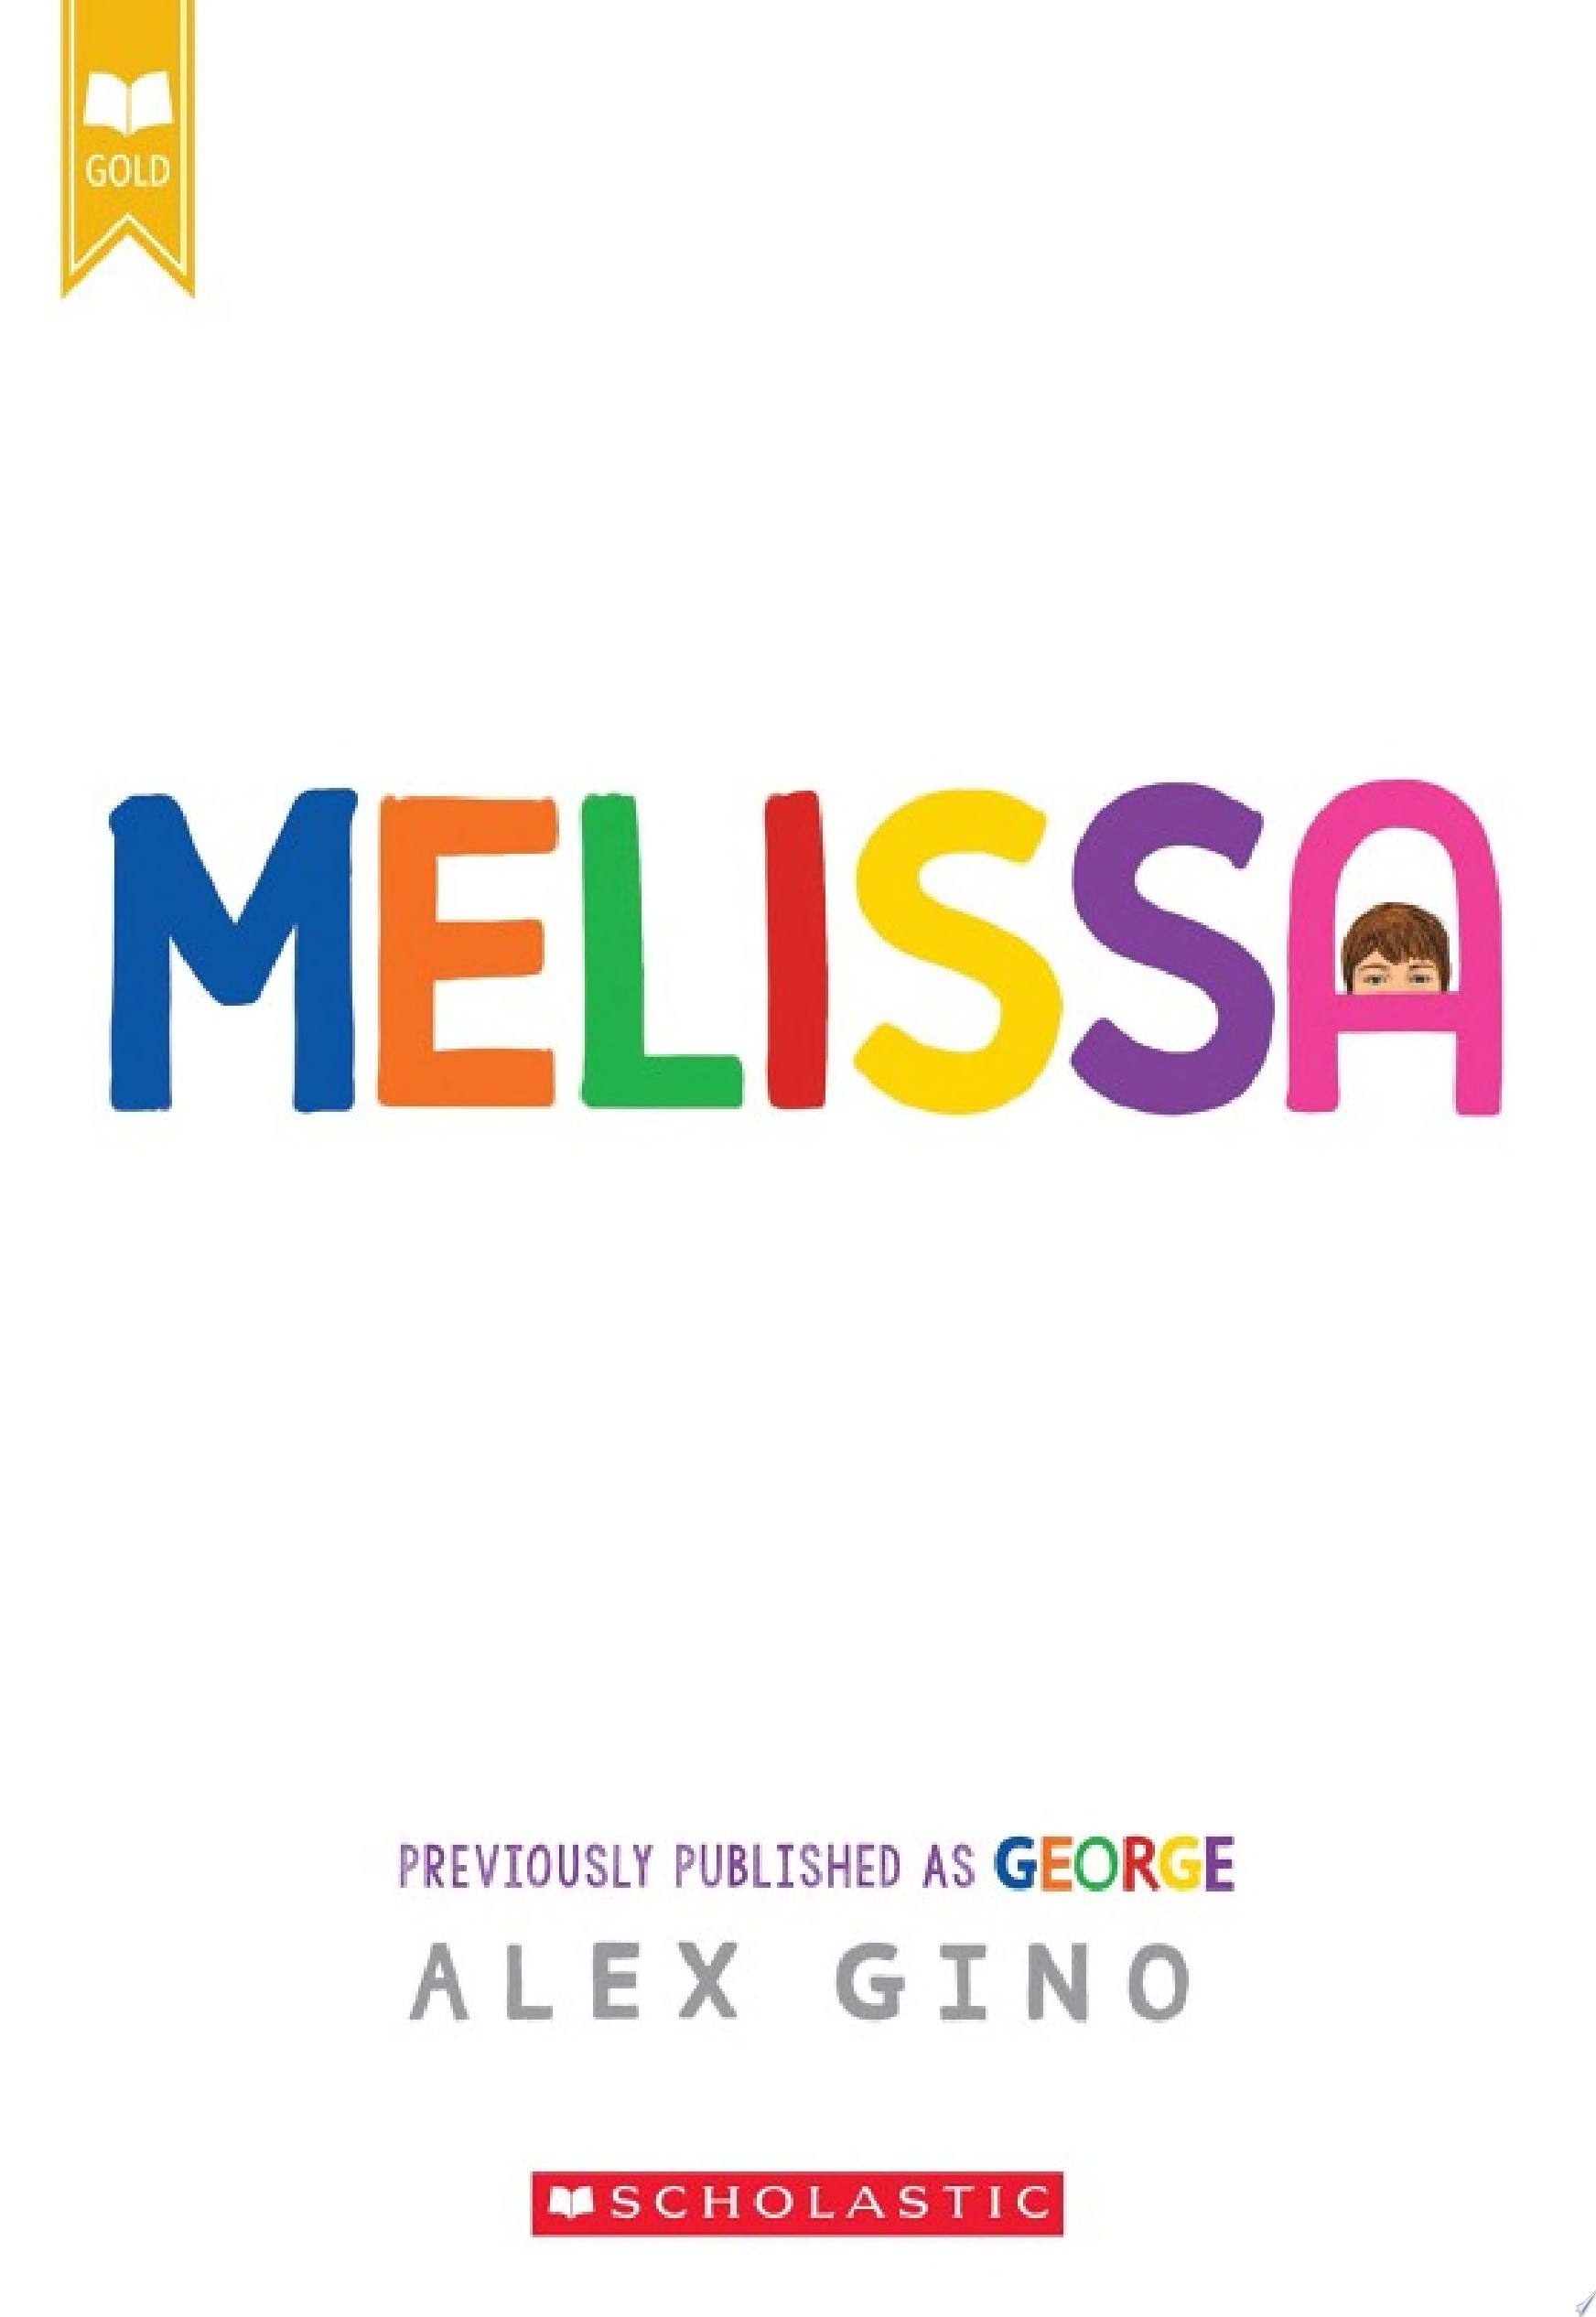 Image for "Melissa (formerly published as GEORGE)"